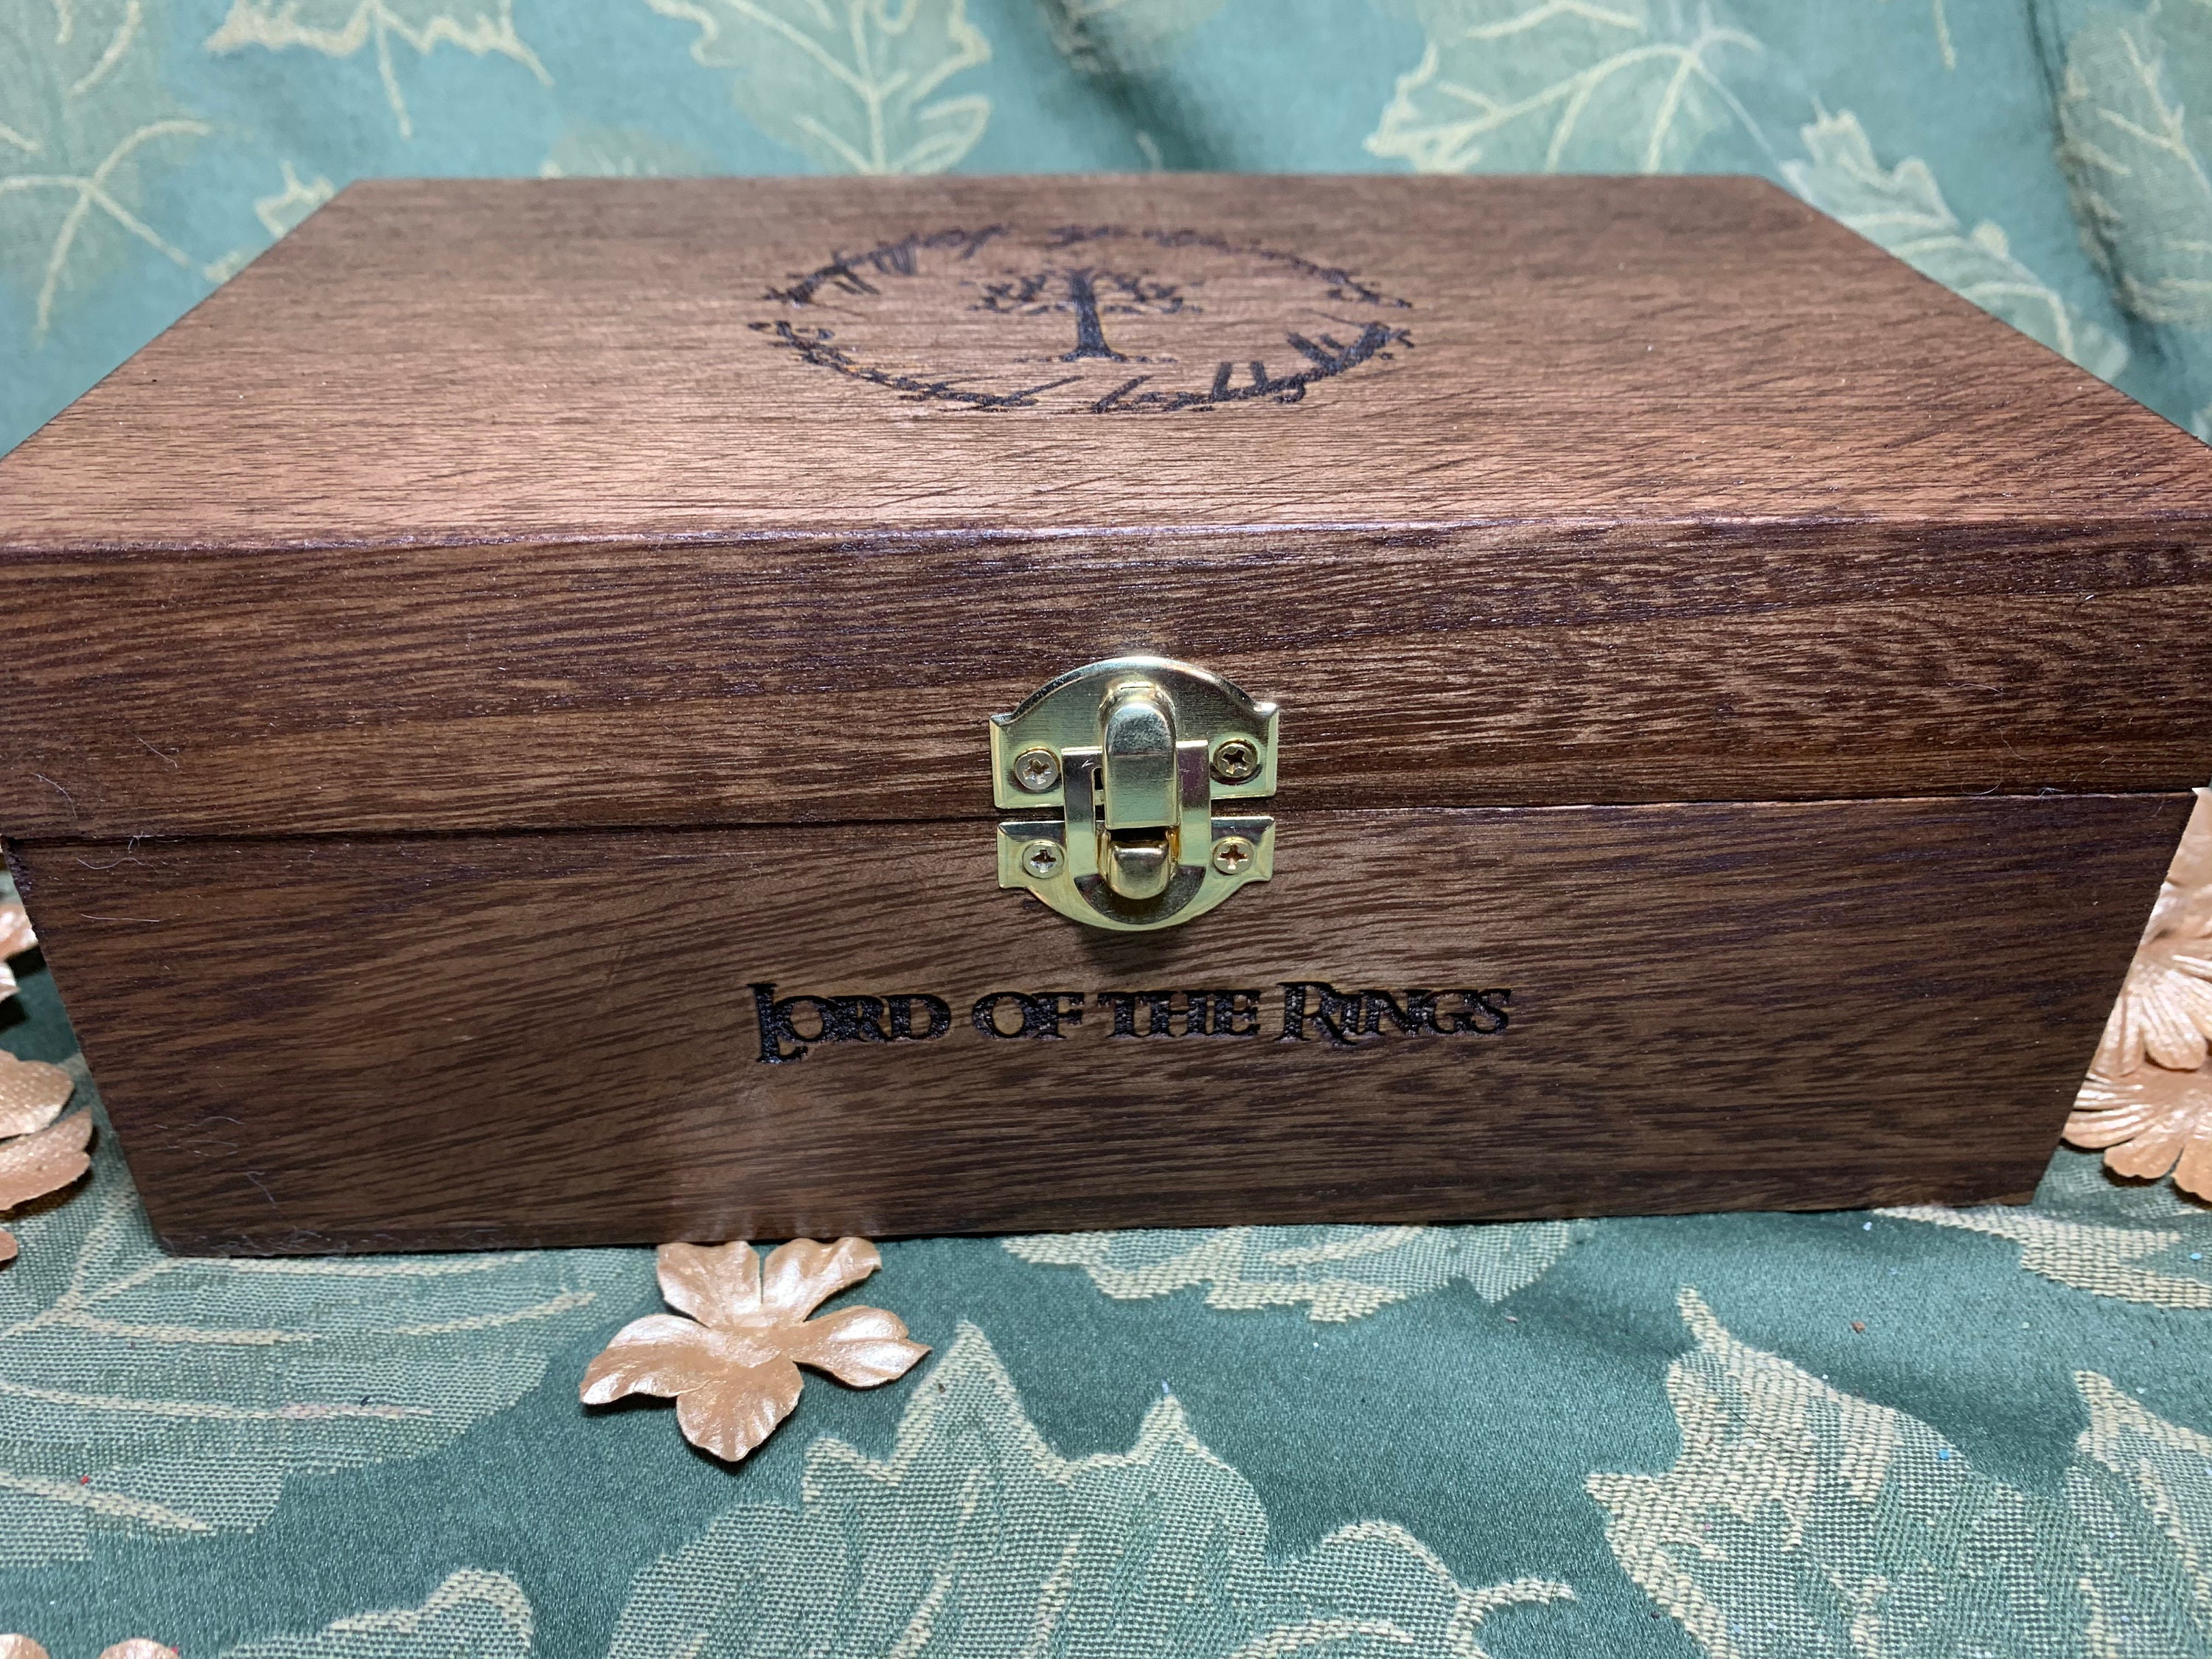 Music Box, Lord of the Rings Music, Gift for Lover, Anniversary Gift,  Valentines Gift, Keepsake Box, Wooden Chest, Lockable, Memory Chest 